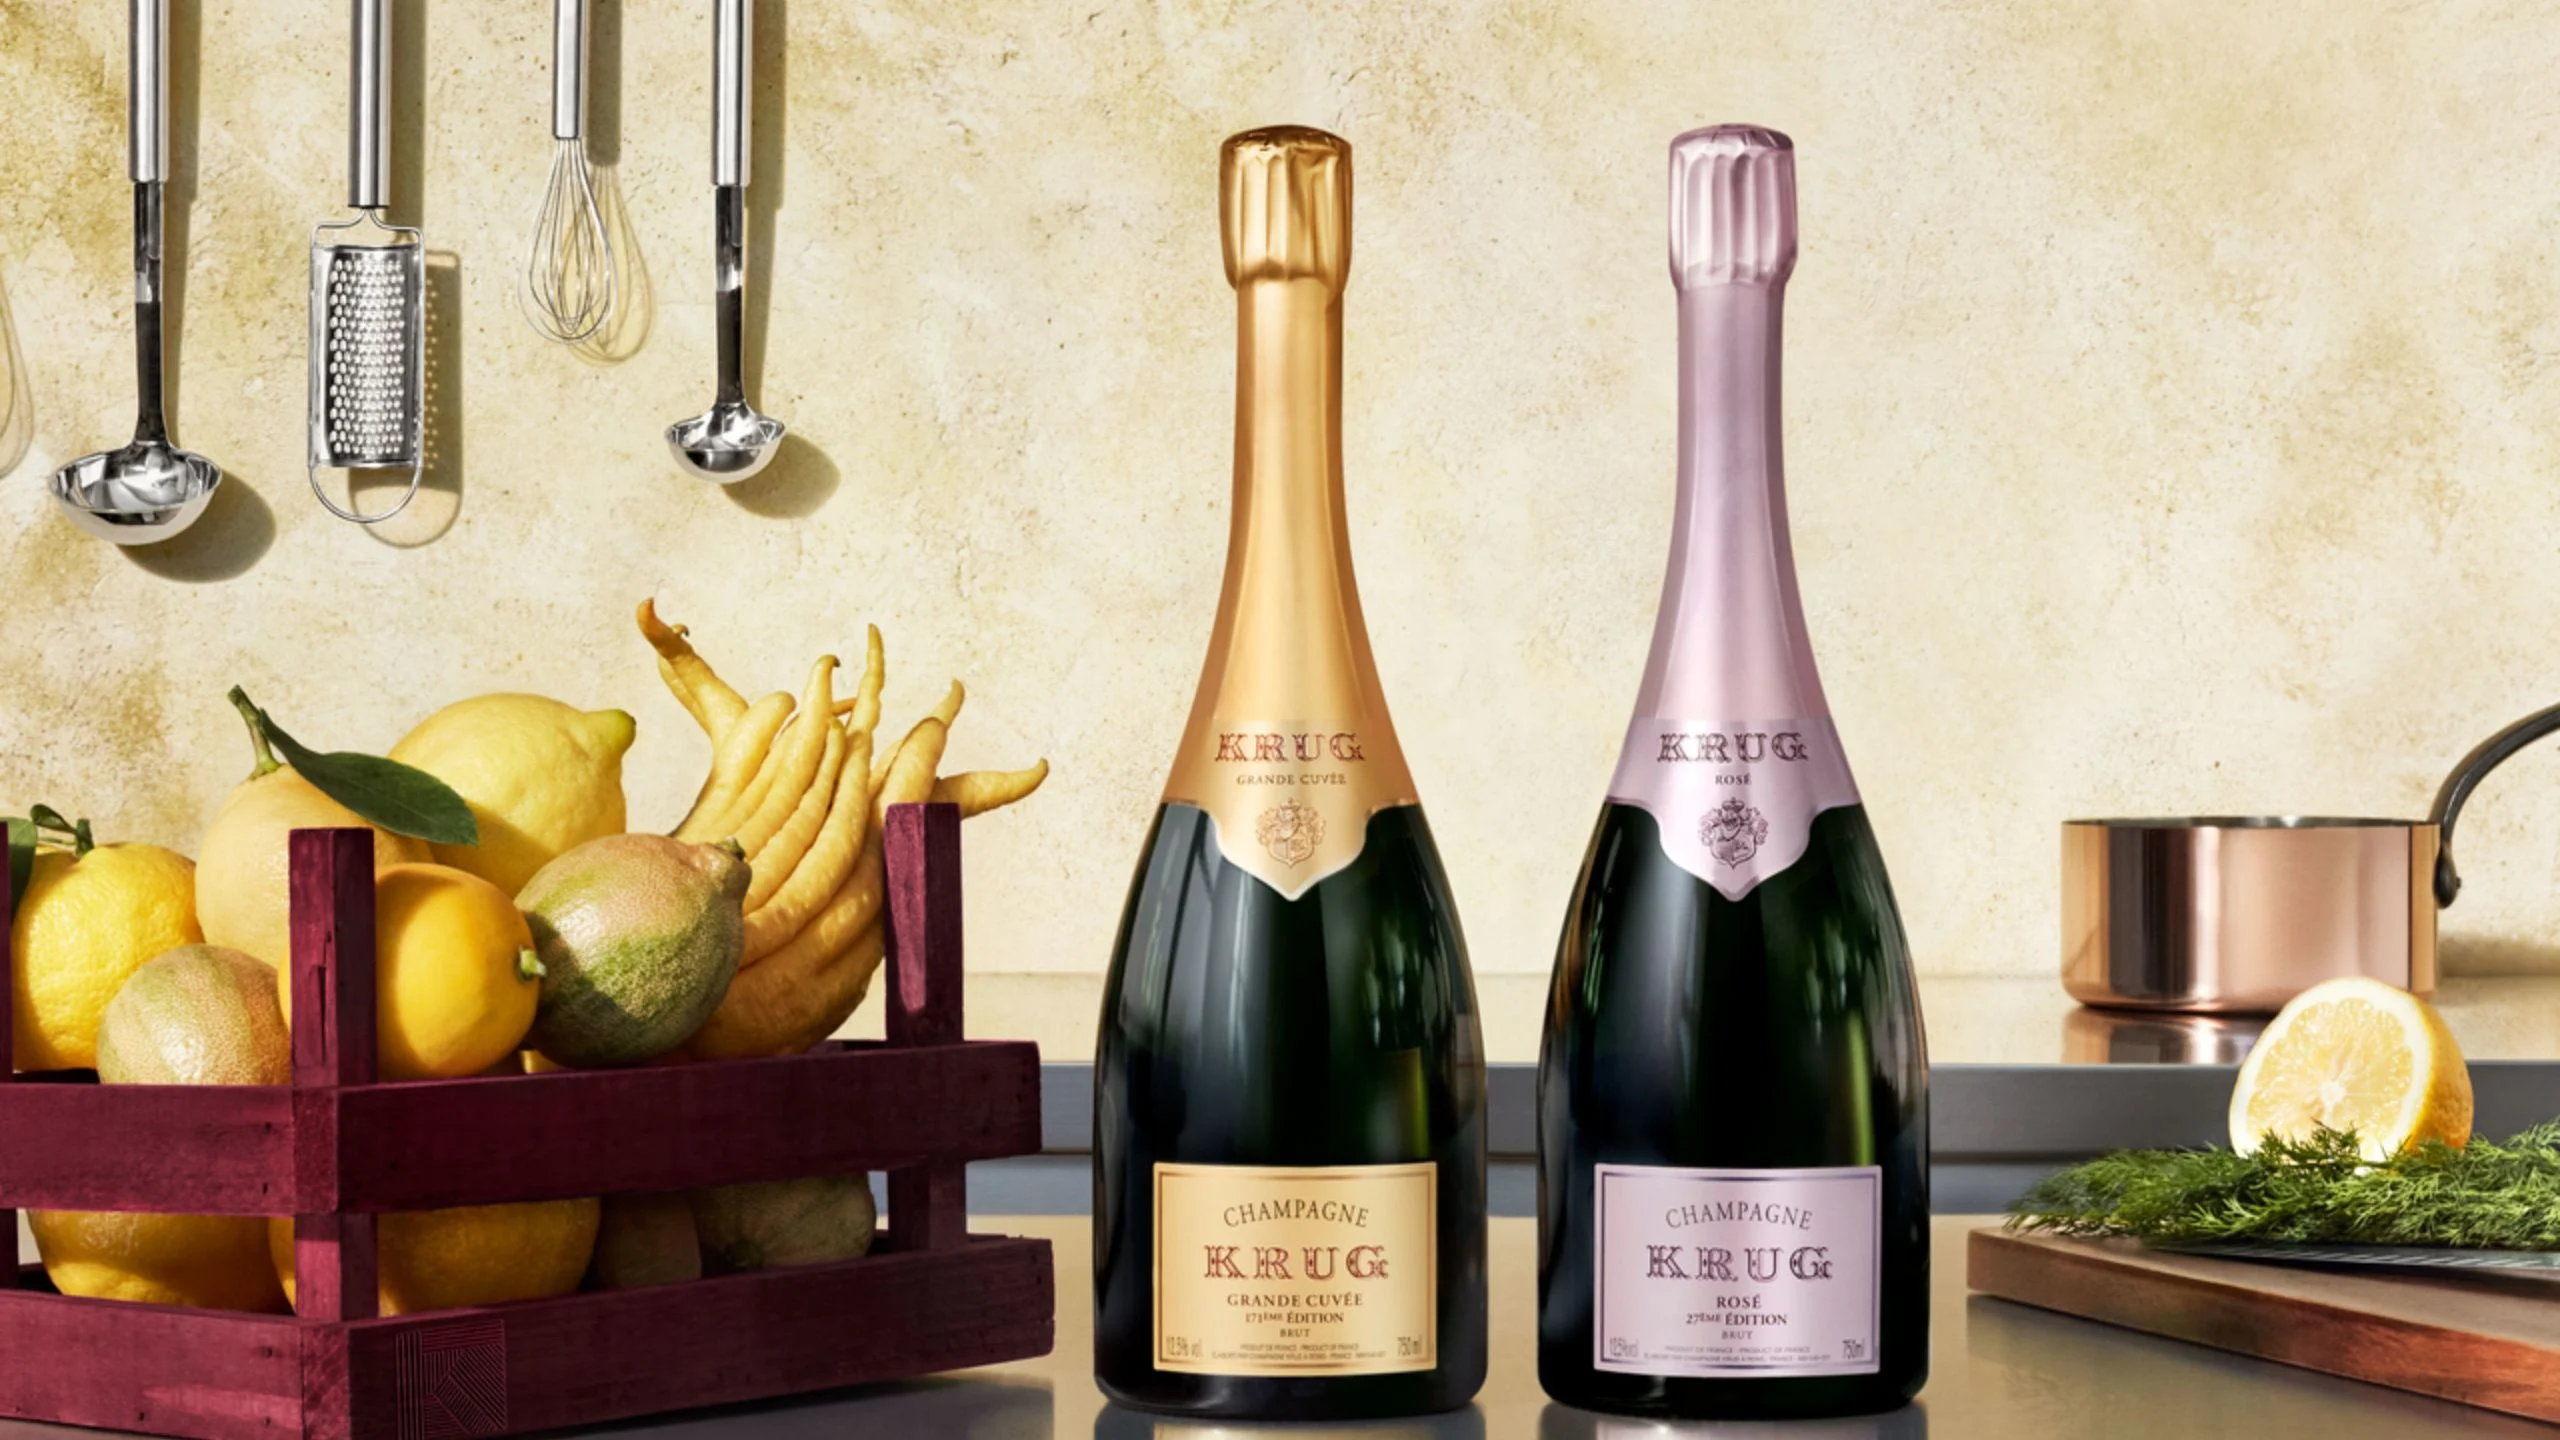 Champagne Krug presenta el libro “The Zest Is Yet To Come”